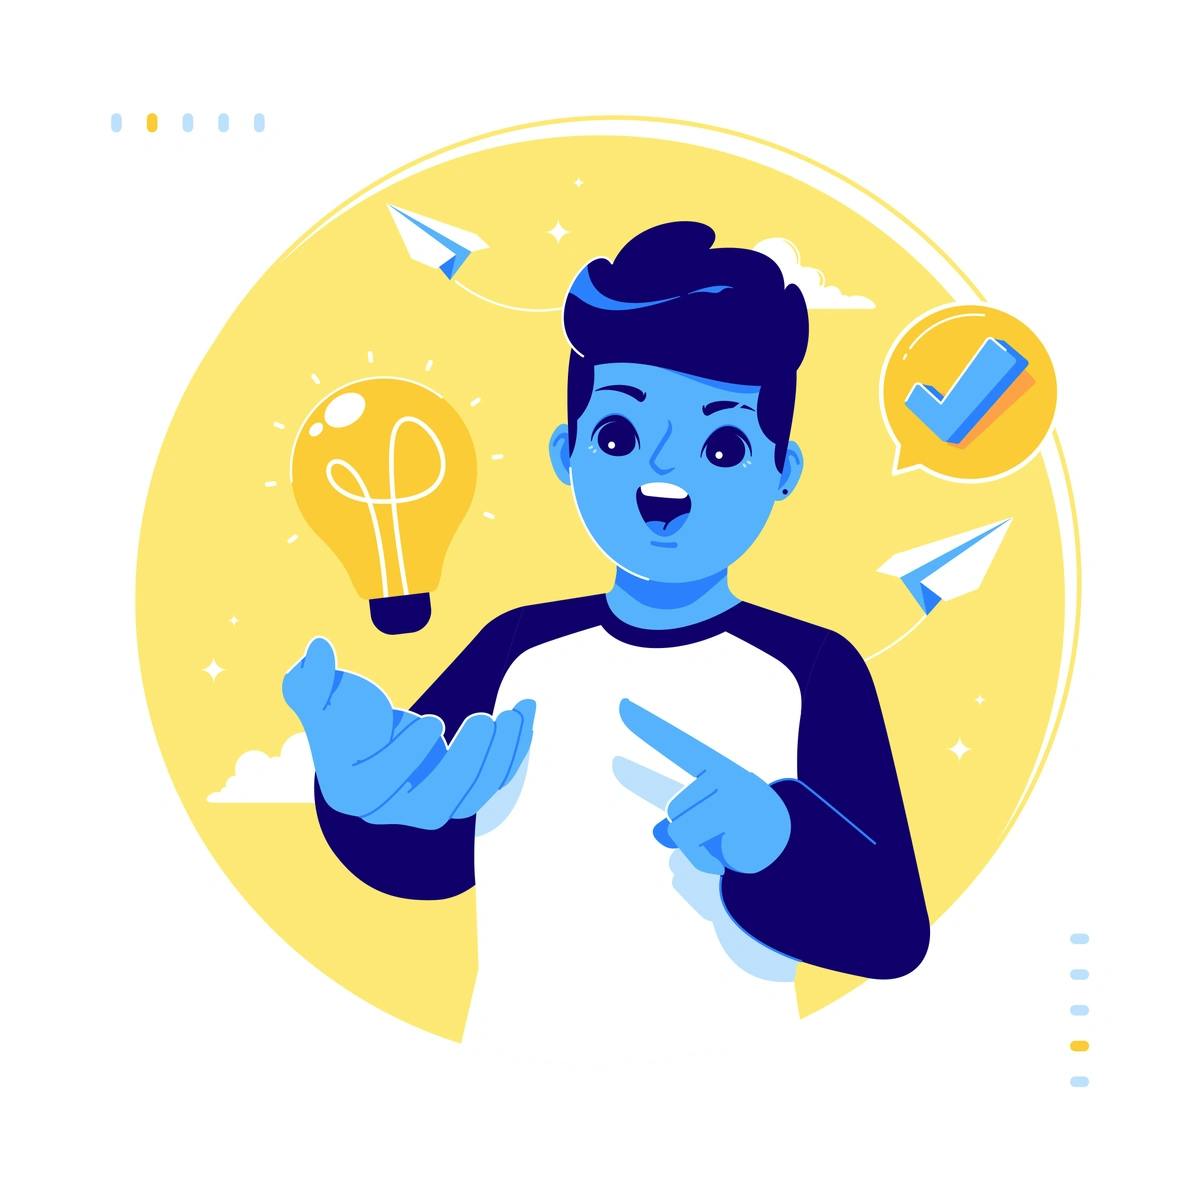 An animated graphic featuring a character with a light bulb and various icons, likely representing the concept of smart or innovative ideas.